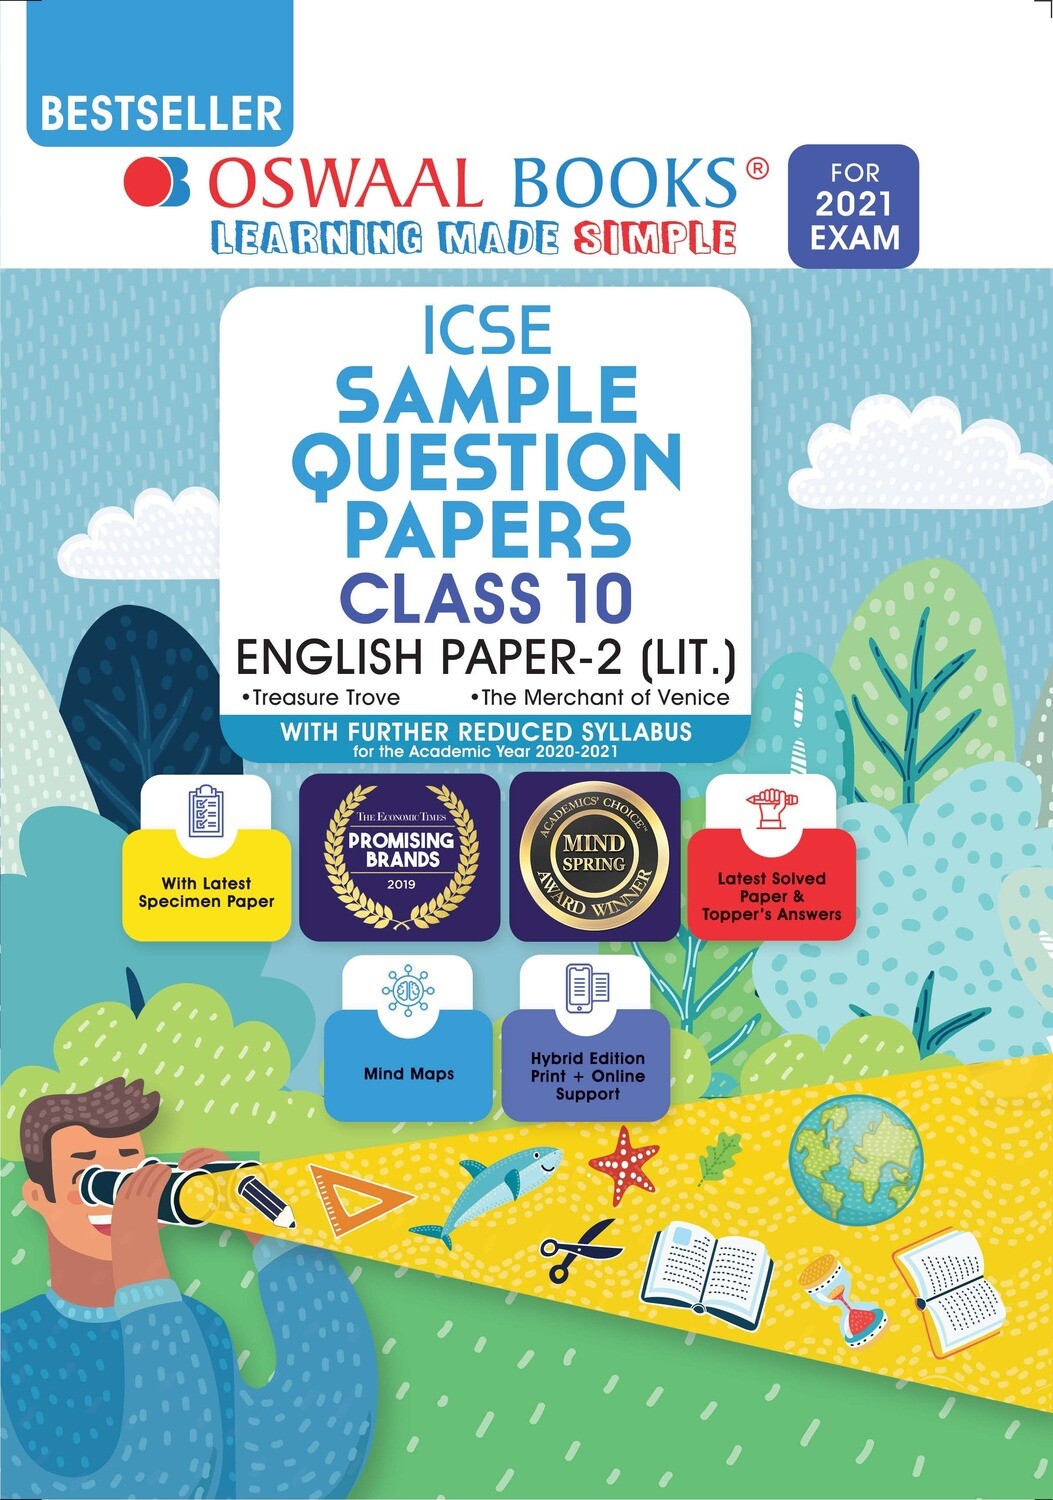 Buy e-book: Oswaal ICSE Sample Question Papers Class 10 English Paper 2 Literature (For 2021 Exam)